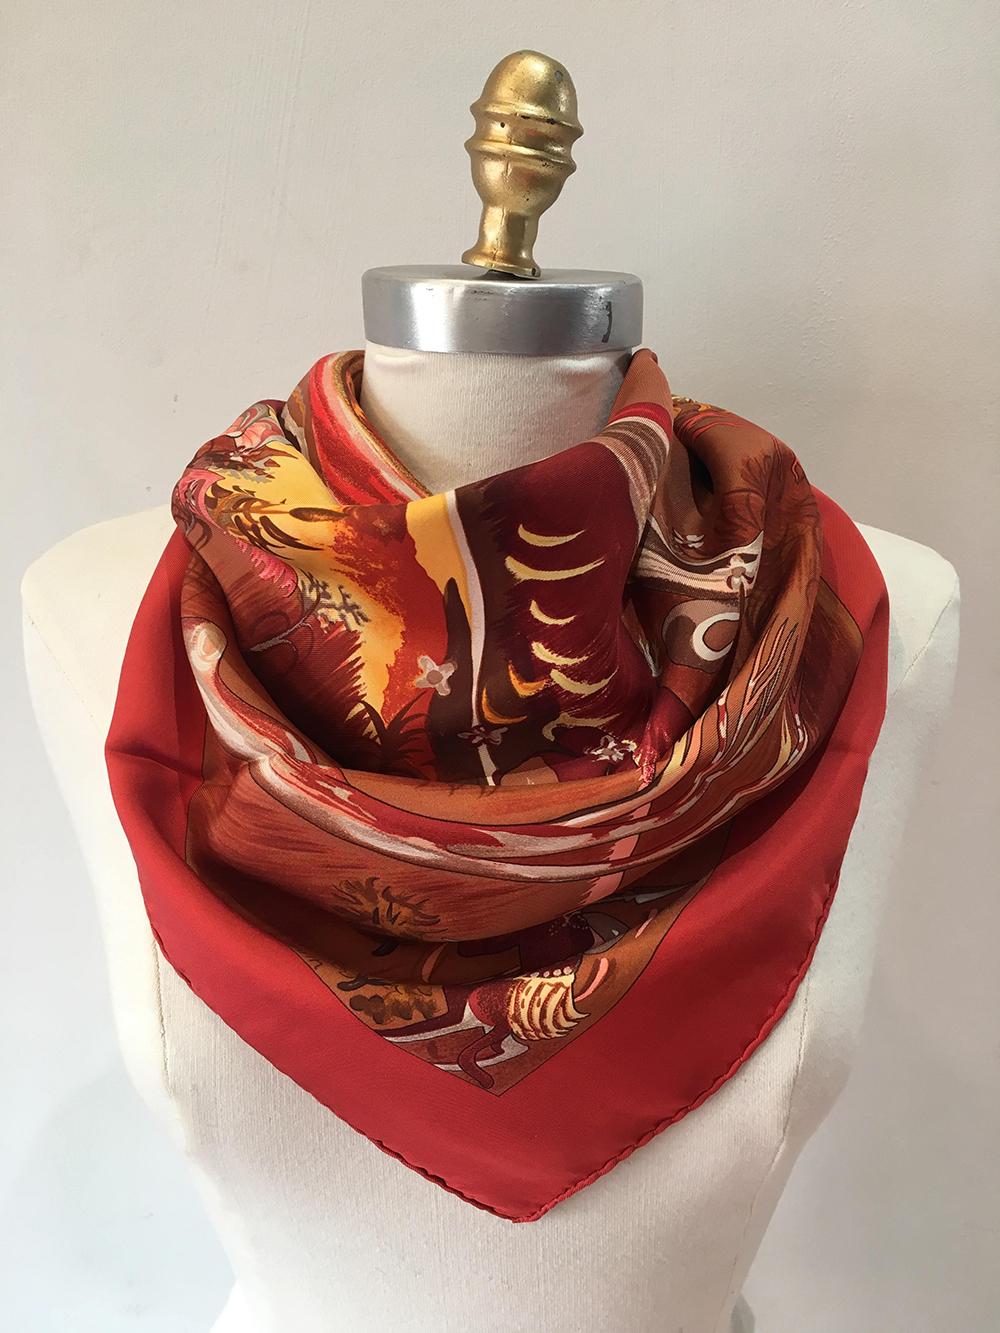 Hermes Vintage Kuggor Tree Silk Scarf in Red in excellent condition. Original silk screen design c.2001 by Sefedin Kwumi features a beautiful artistic painted depiction of a tree in various reds, pinks, corals, browns, tans, yellows, and more in a